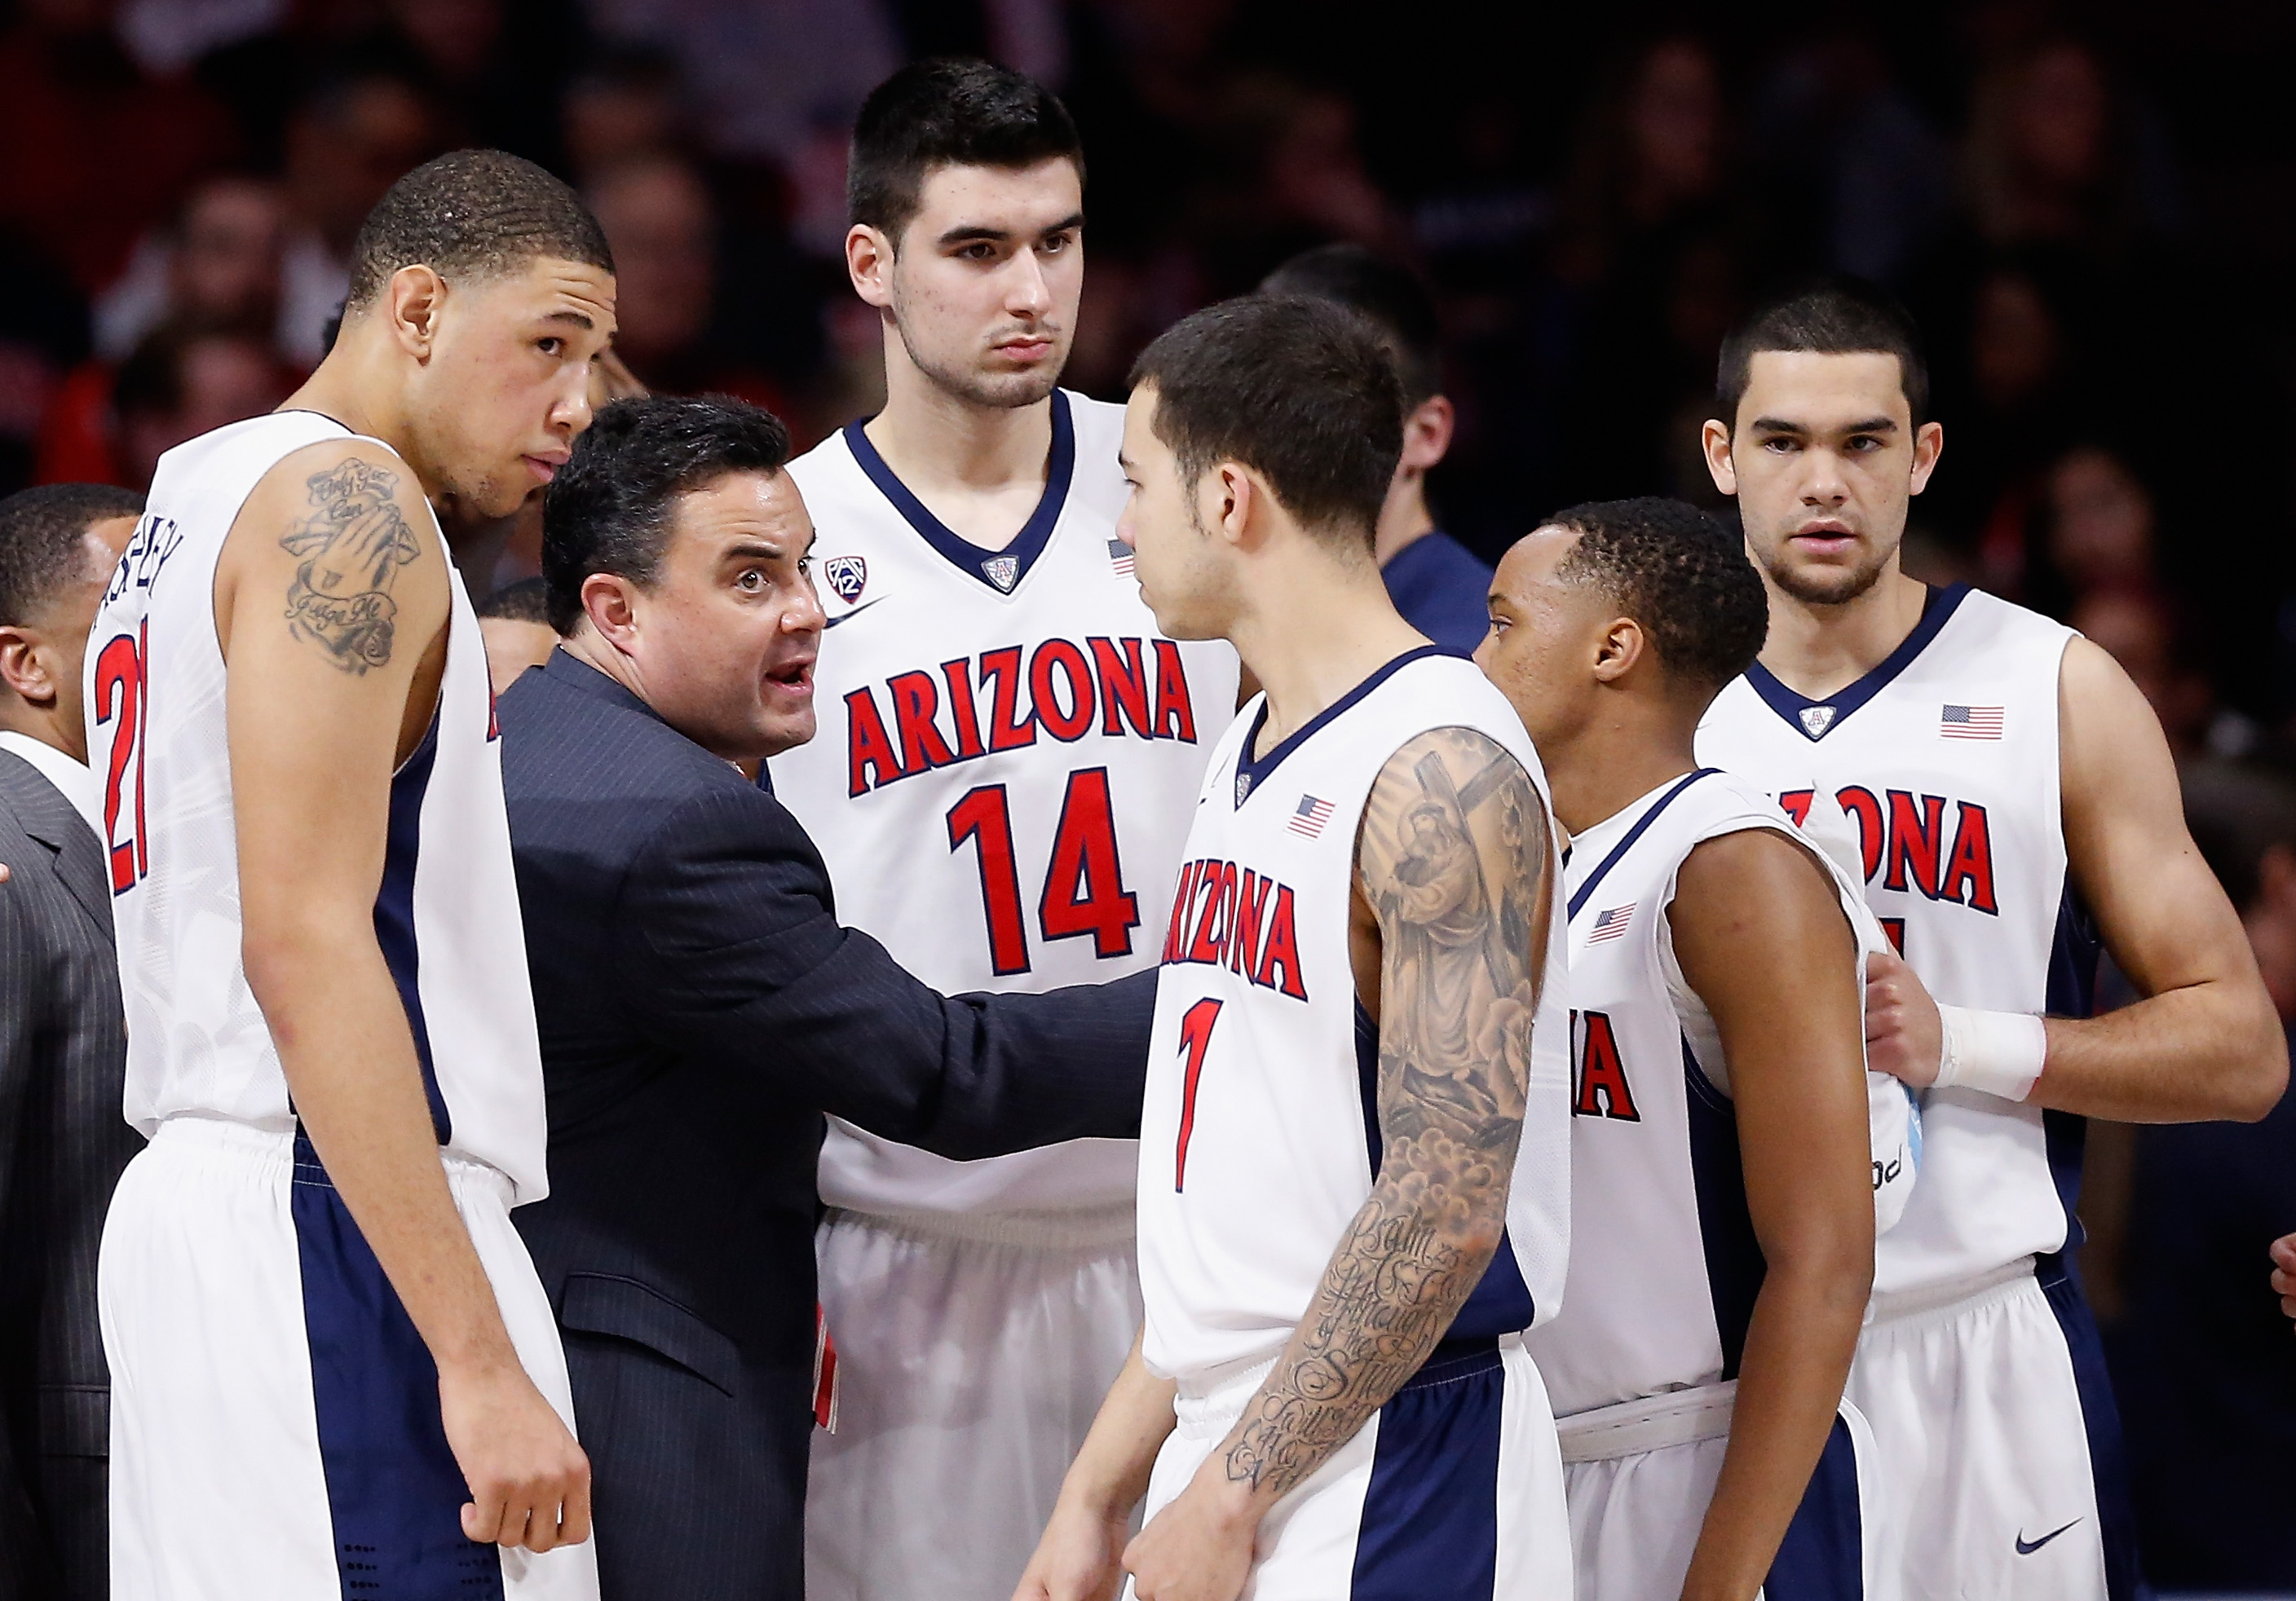 University of Arizona Wildcats: 5 Fast Facts You Need to Know | Heavy.com